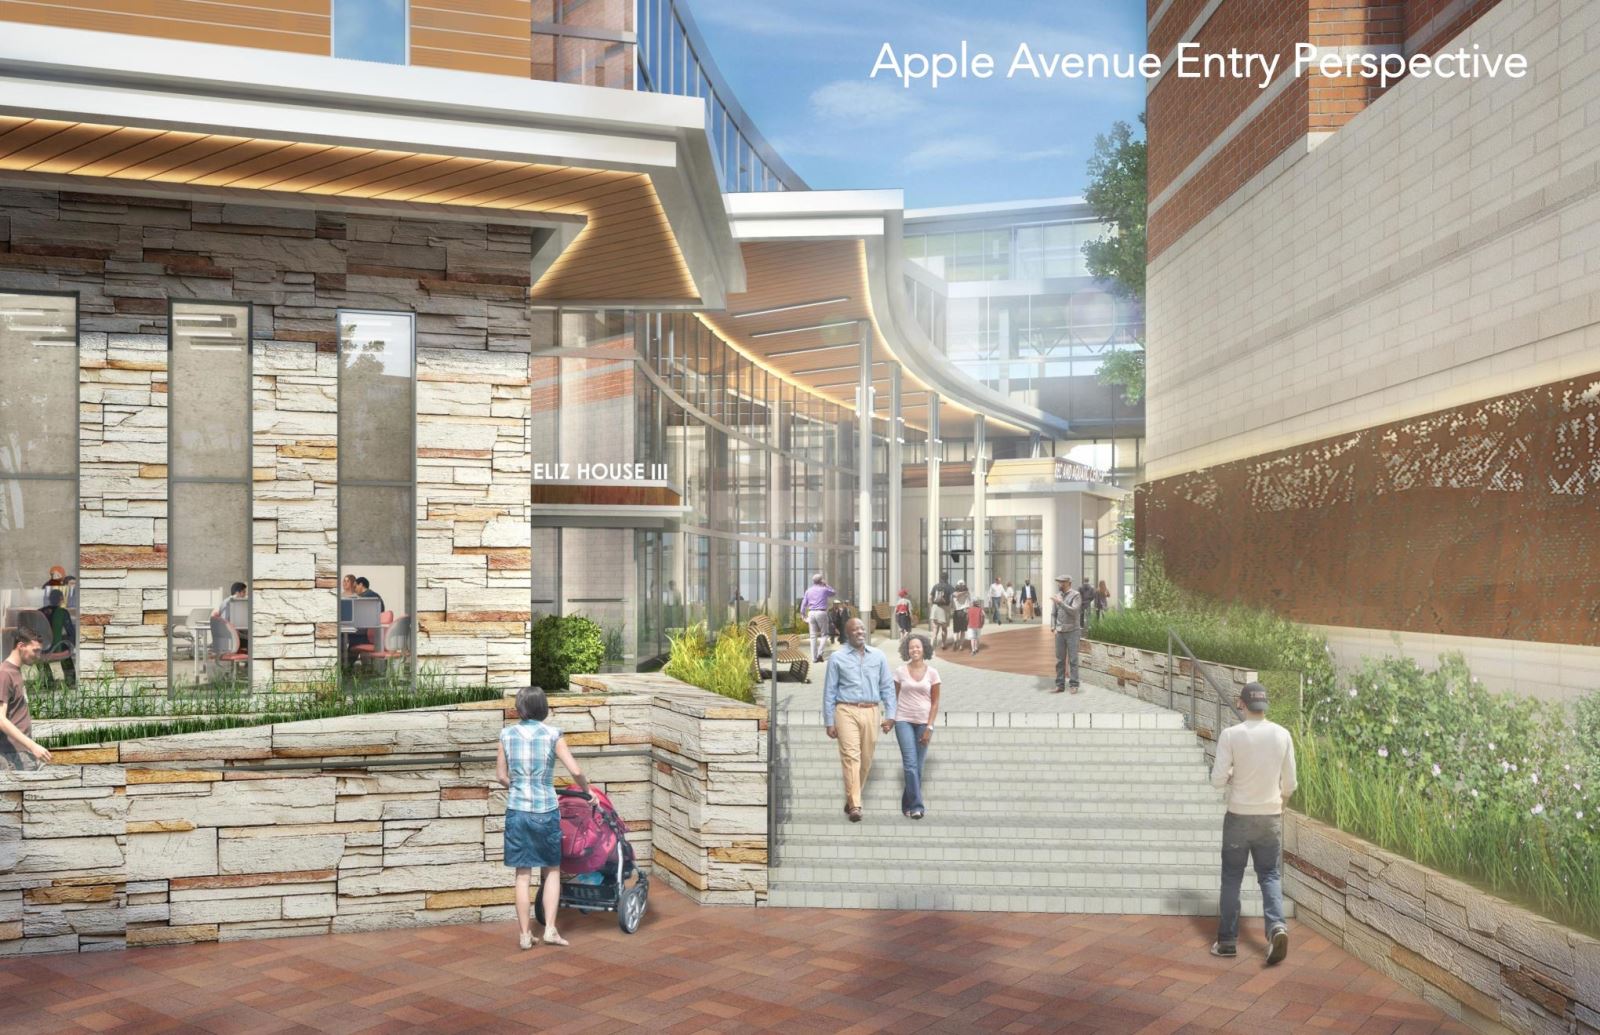 Apple Avenue Entry Perspective